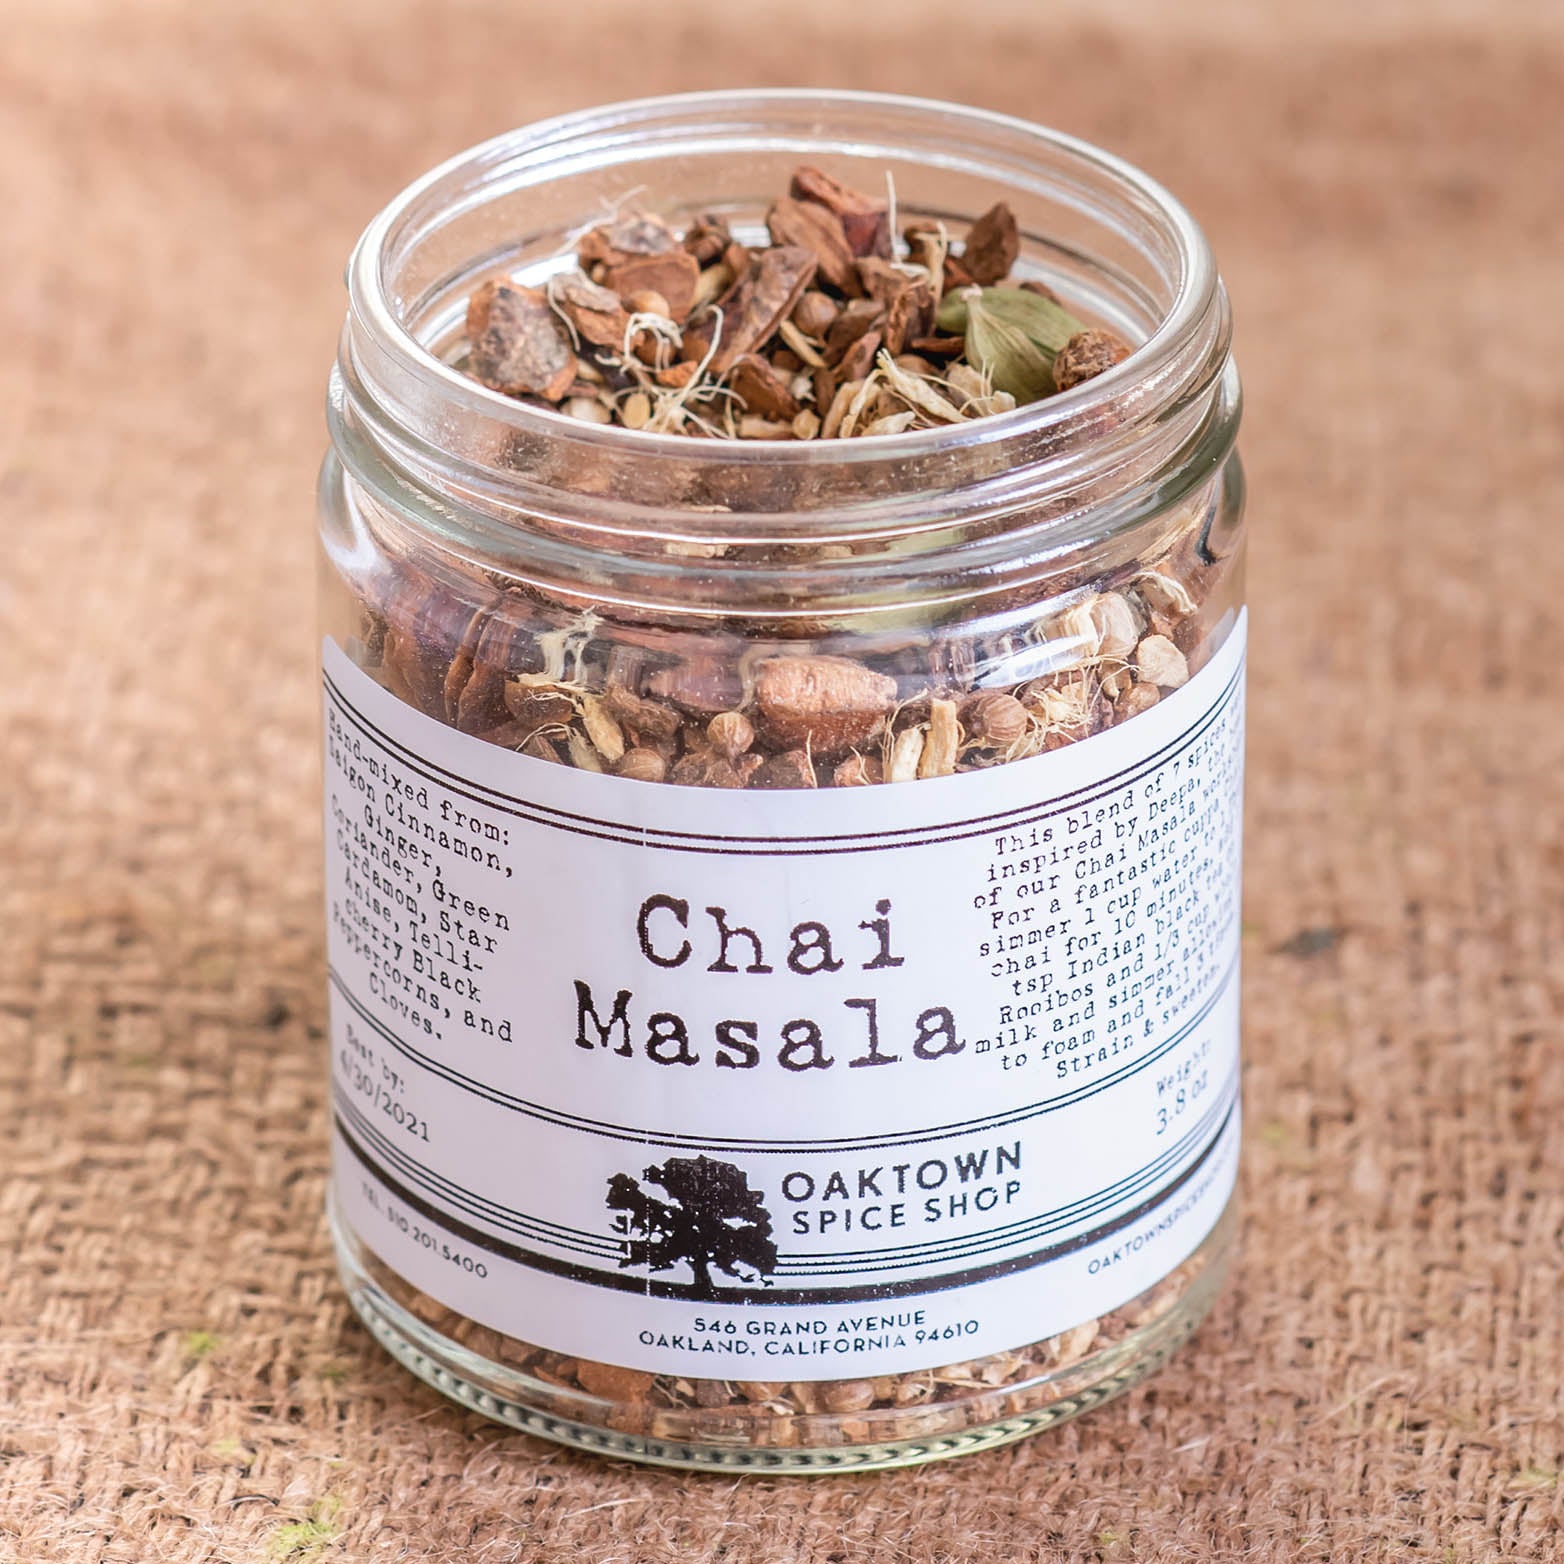 Chai Masala Blend with Cinnamon and Ginger and Pepper meets sweet notes of Cardamom and Star Anise and Cloves along with fragrant Coriander